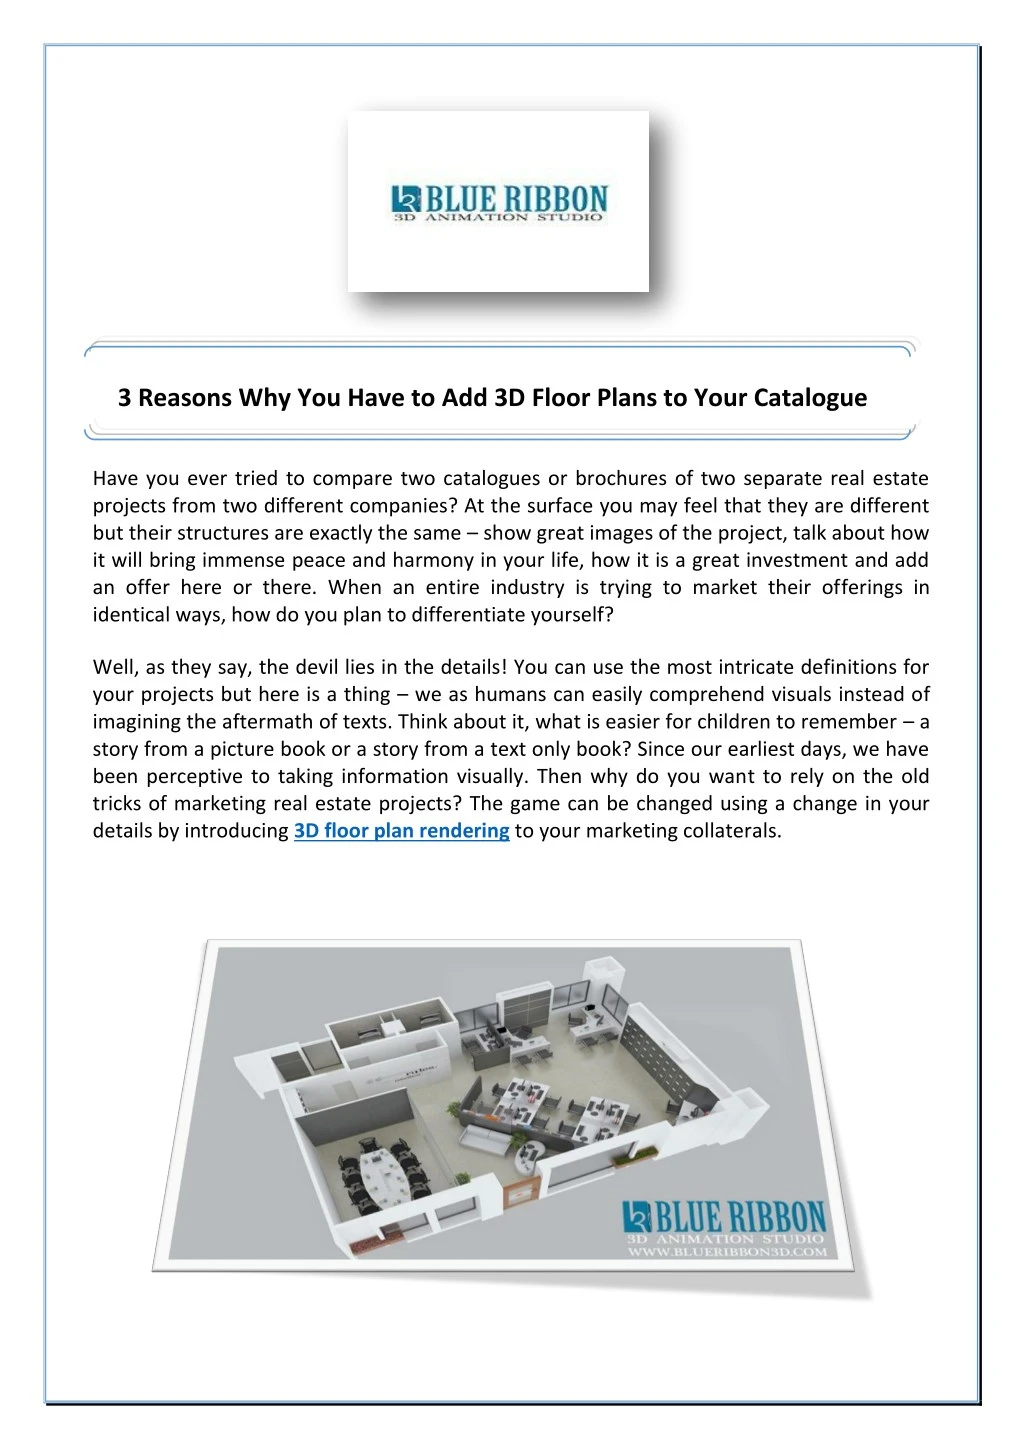 3 reasons why you have to add 3d floor plans